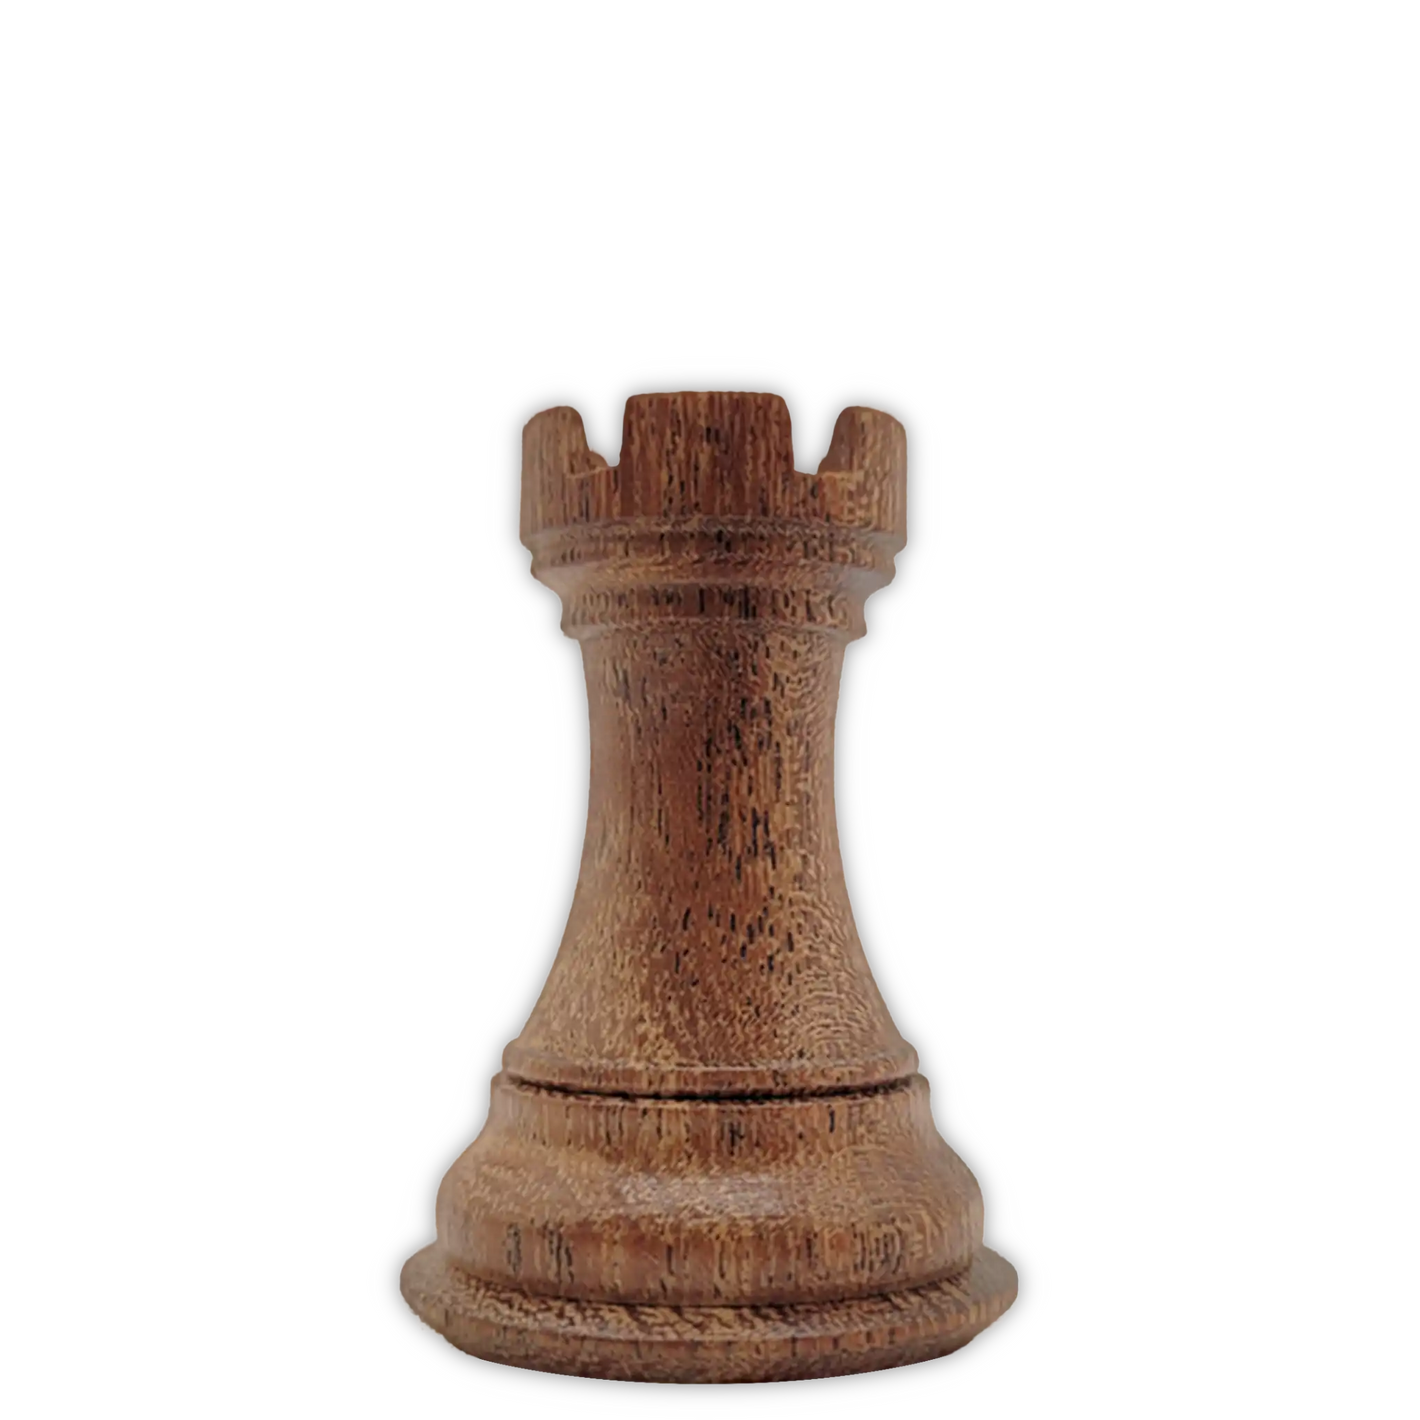 A rook from a chess game